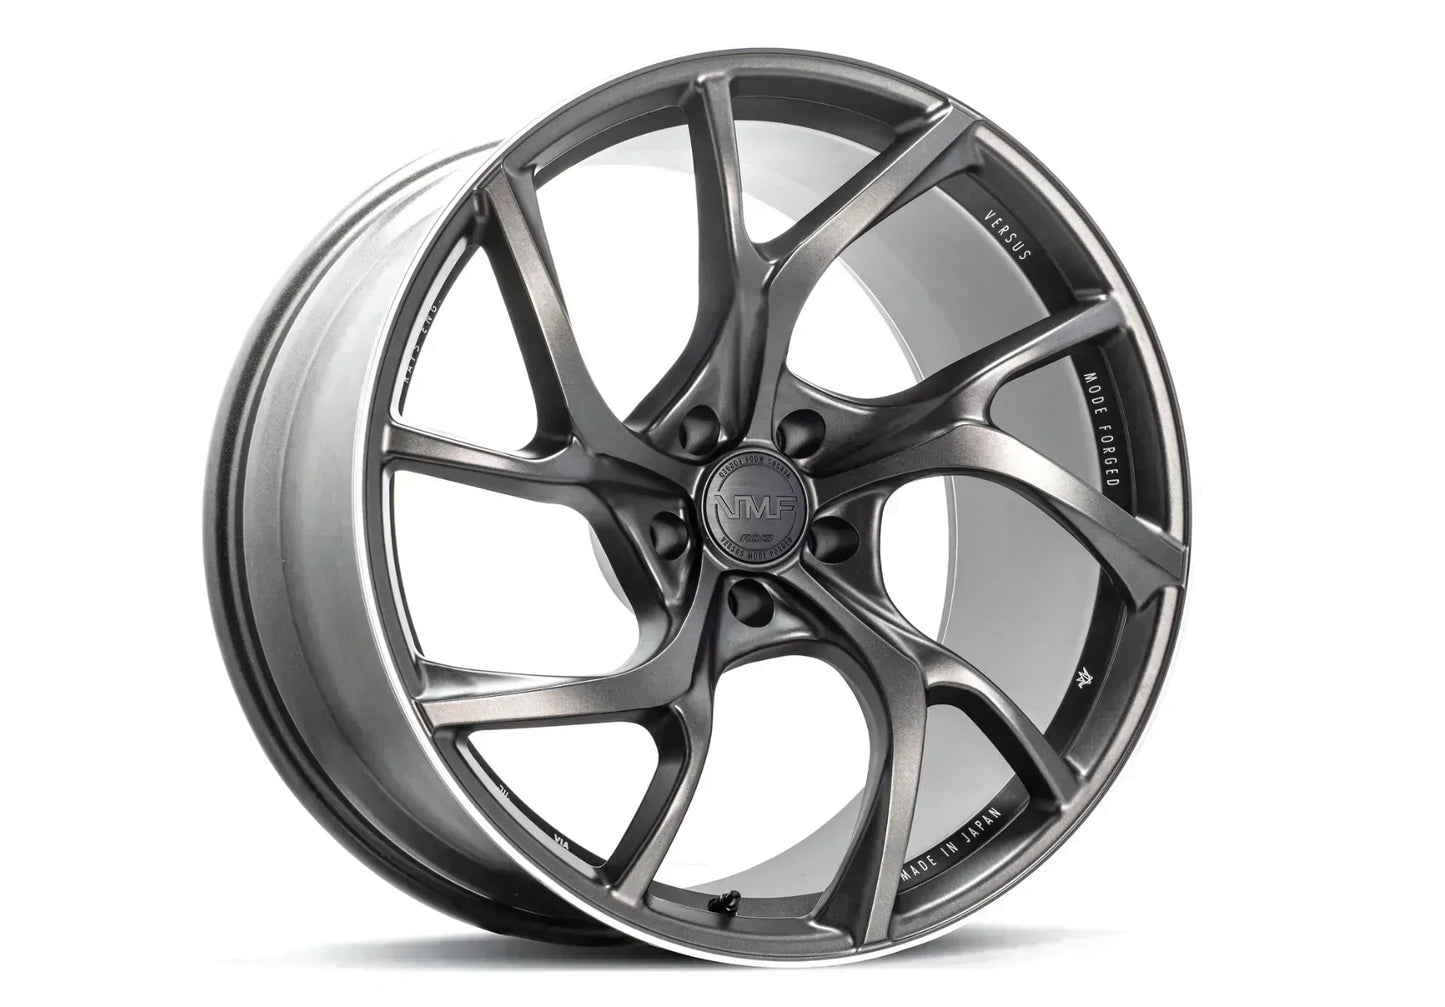 Versus Mode Forged (VMF) C-01 20x9.5 | 5x114.3